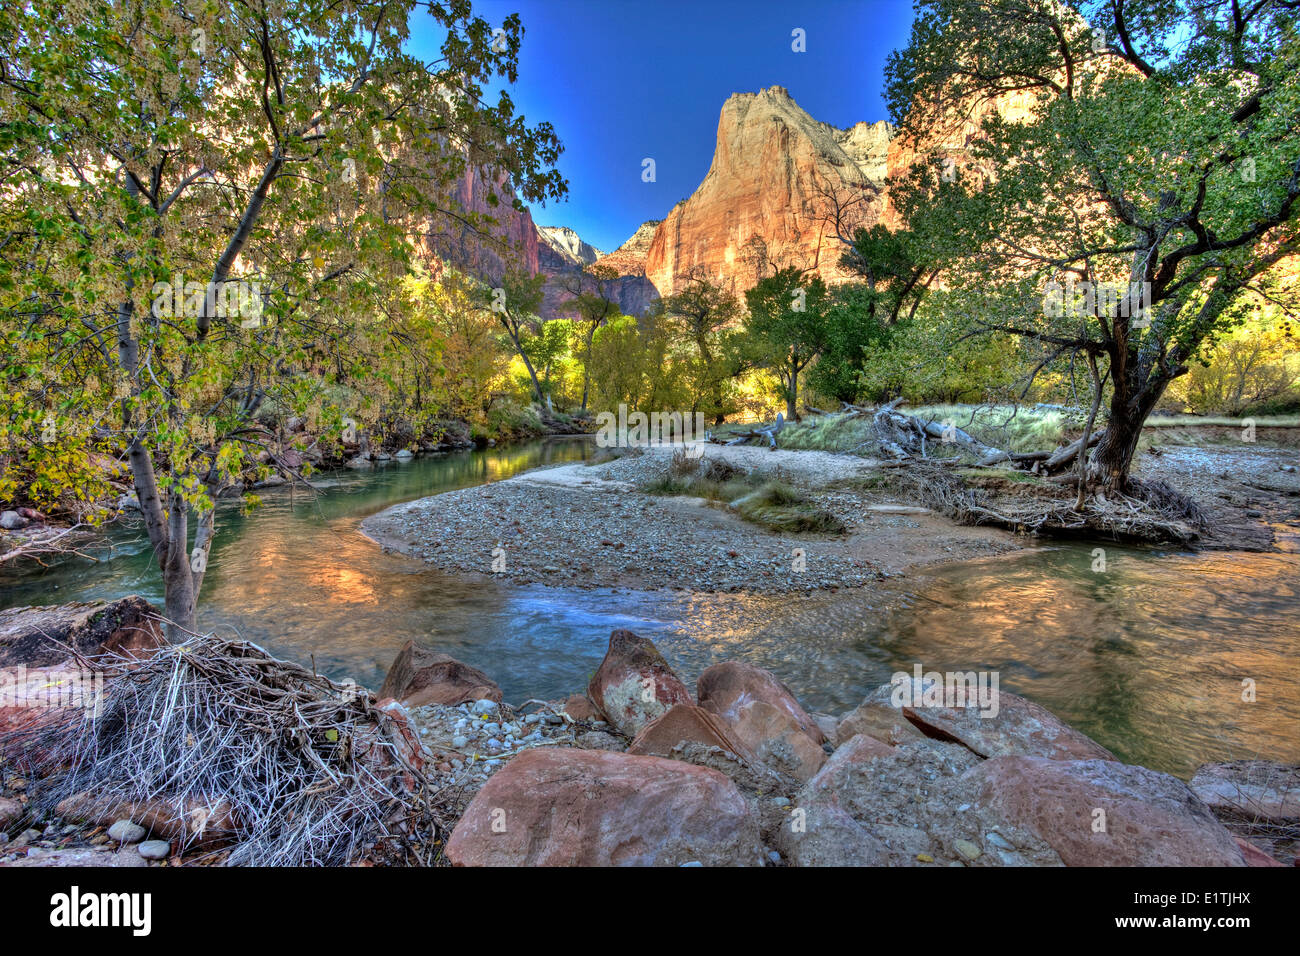 Court of the Patriarchs, North Fork Virgin River, Zion National Park, Utah, USA Stock Photo